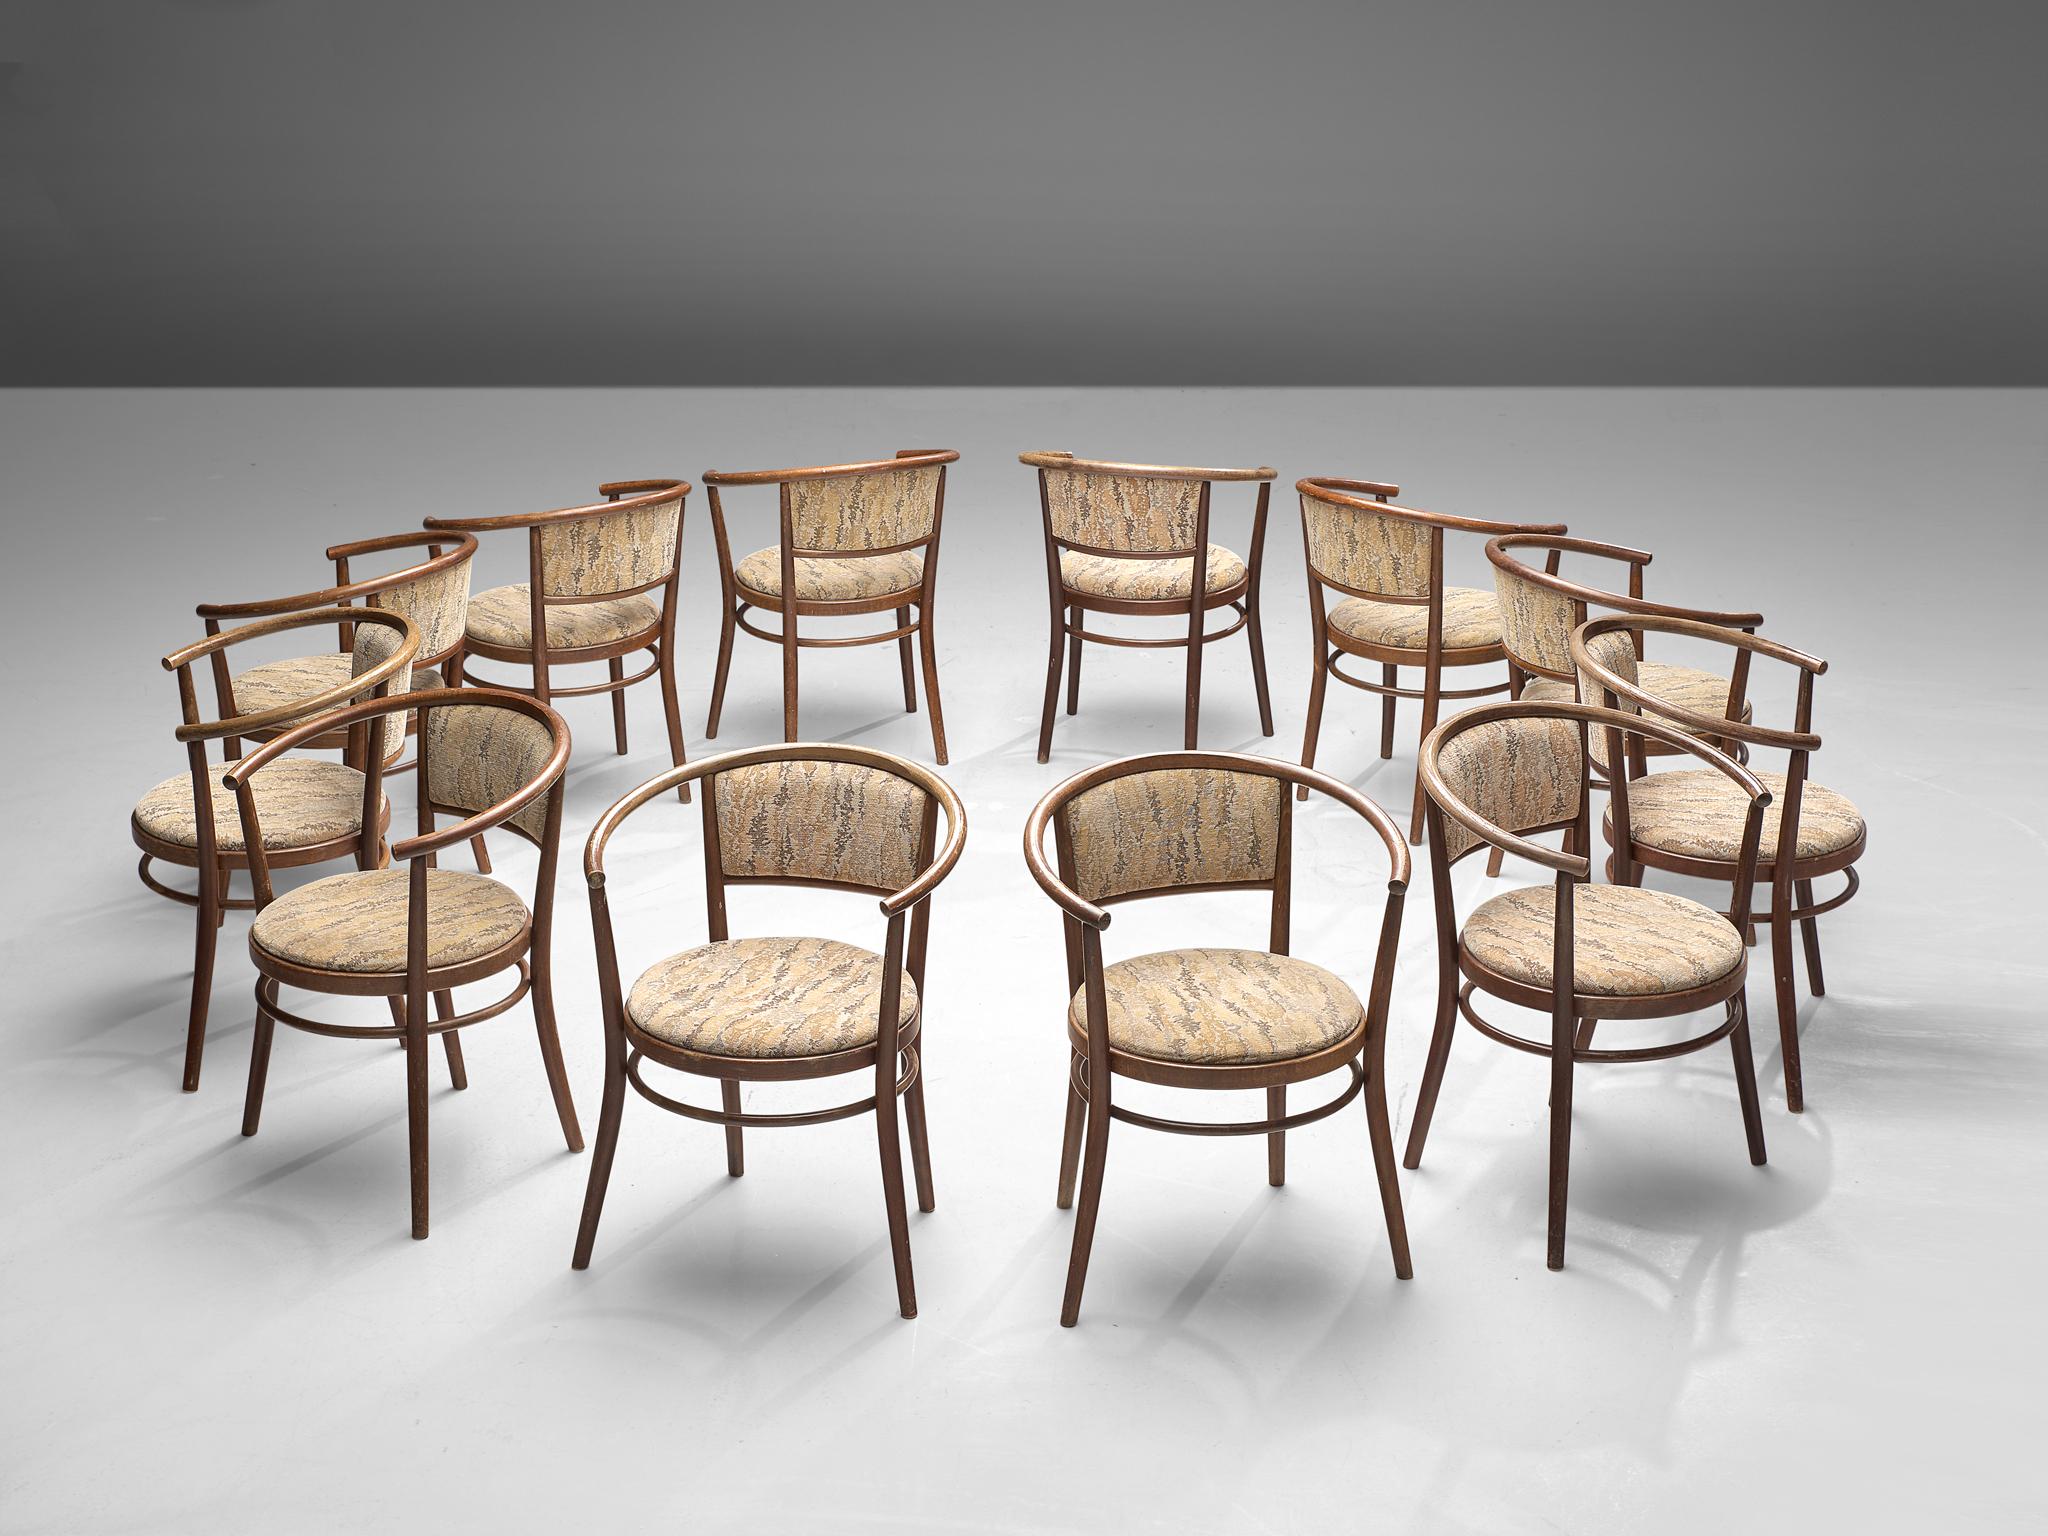 Ton, set of armchairs, bentwood, fabric upholstery, beech, Czech Republic, 1960s

This elegant set of dining chairs, manufactured by Ton, features a wonderful bentwood frame. The round shape of the backrest surrounds the user. The seat and backrest